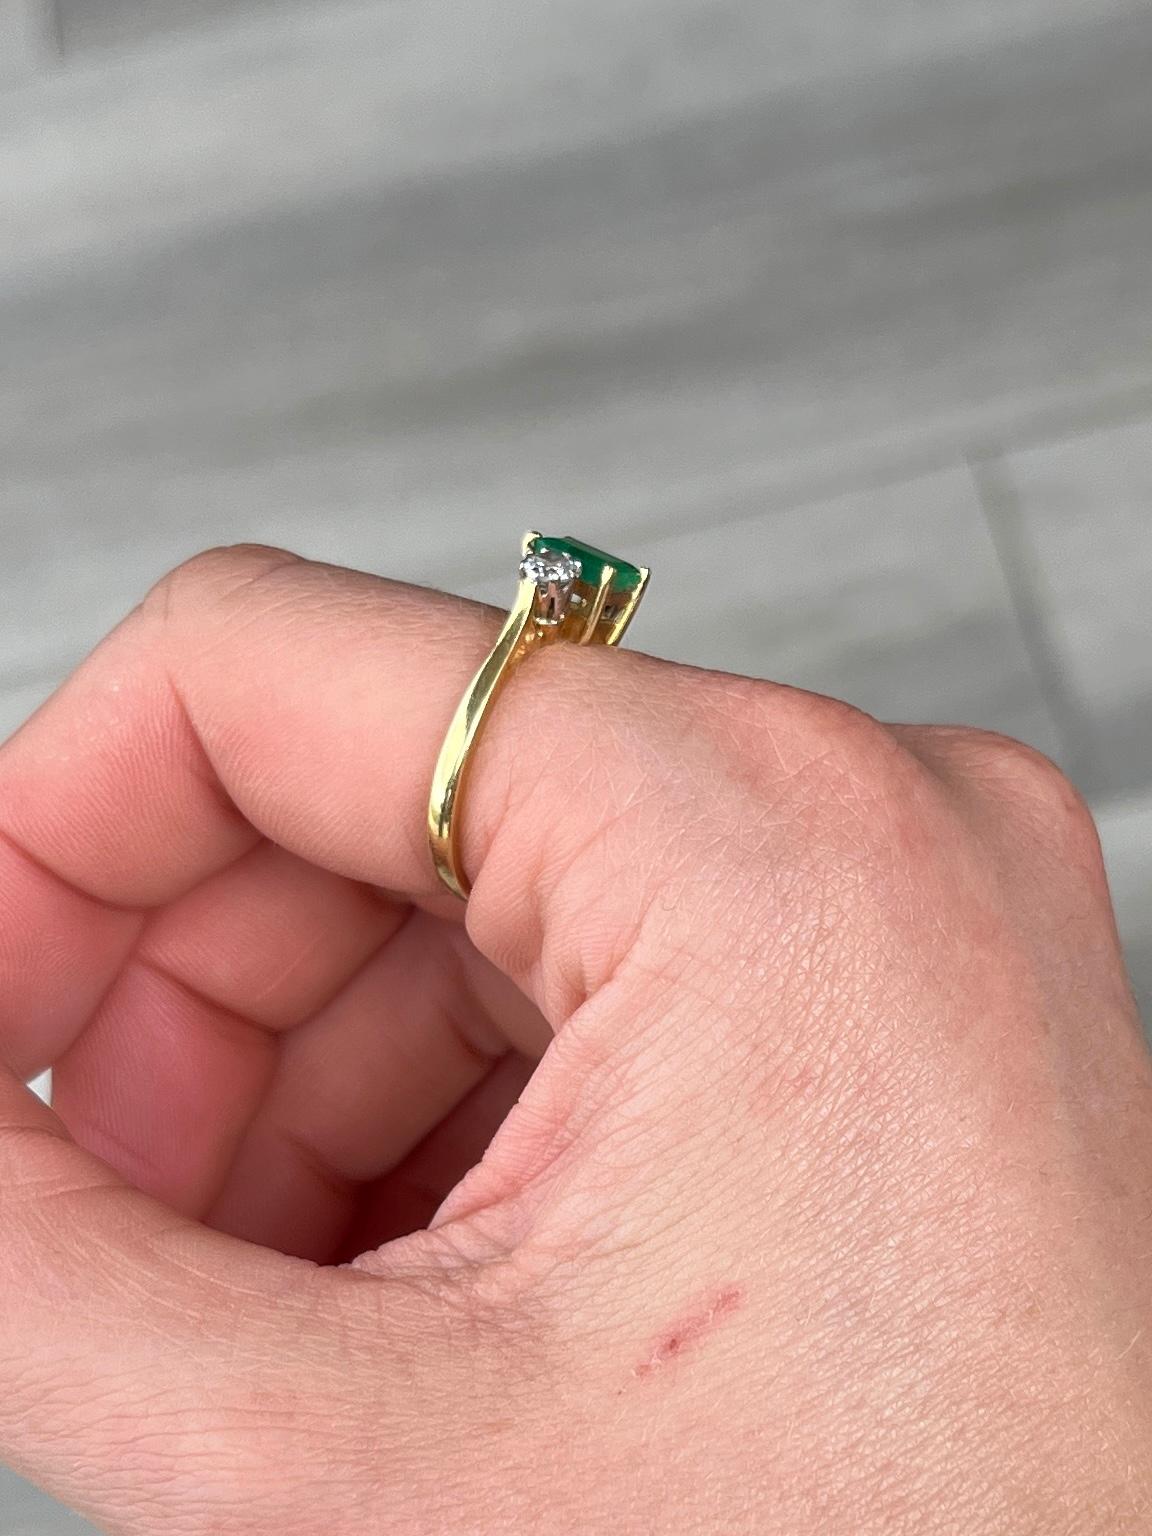 The central emerald is so bright and beautiful and measures 30pts. Sat either side it are two bright shimmering old European cut diamonds each measuring 20pts. The ring is modelled in 18ct gold.

Ring Size: N or 6 3/4 
Height Off Finger: